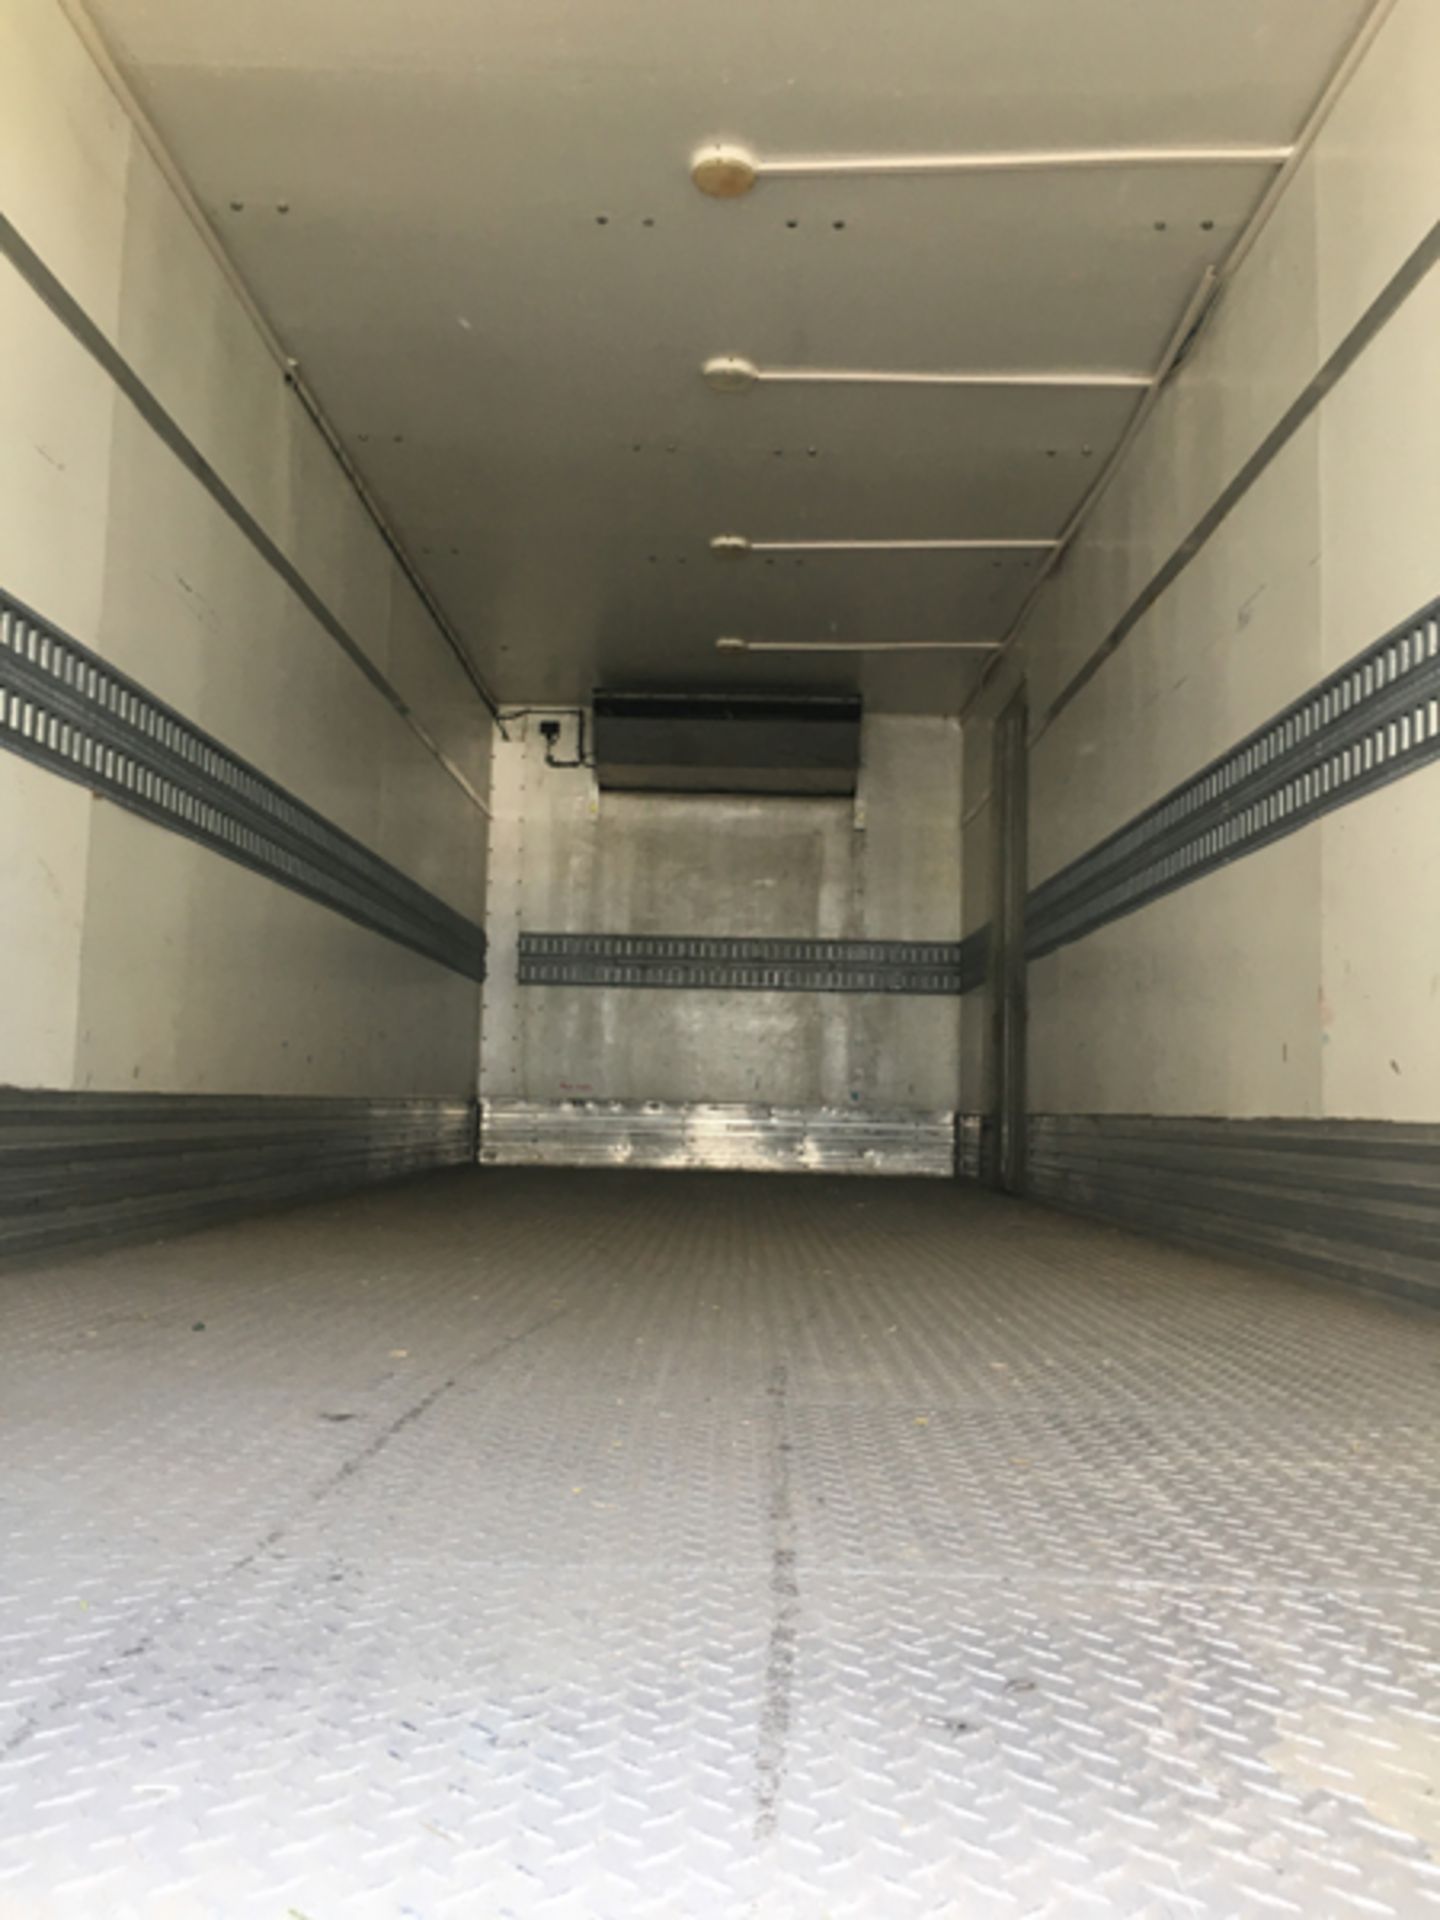 2018 INTERNATIONAL 4400 SBA 6X4 REFRIGERATED BOX TRUCK VIN#: 1HTMSTAR0JH528962, Approx Miles: 74951, - Image 5 of 8